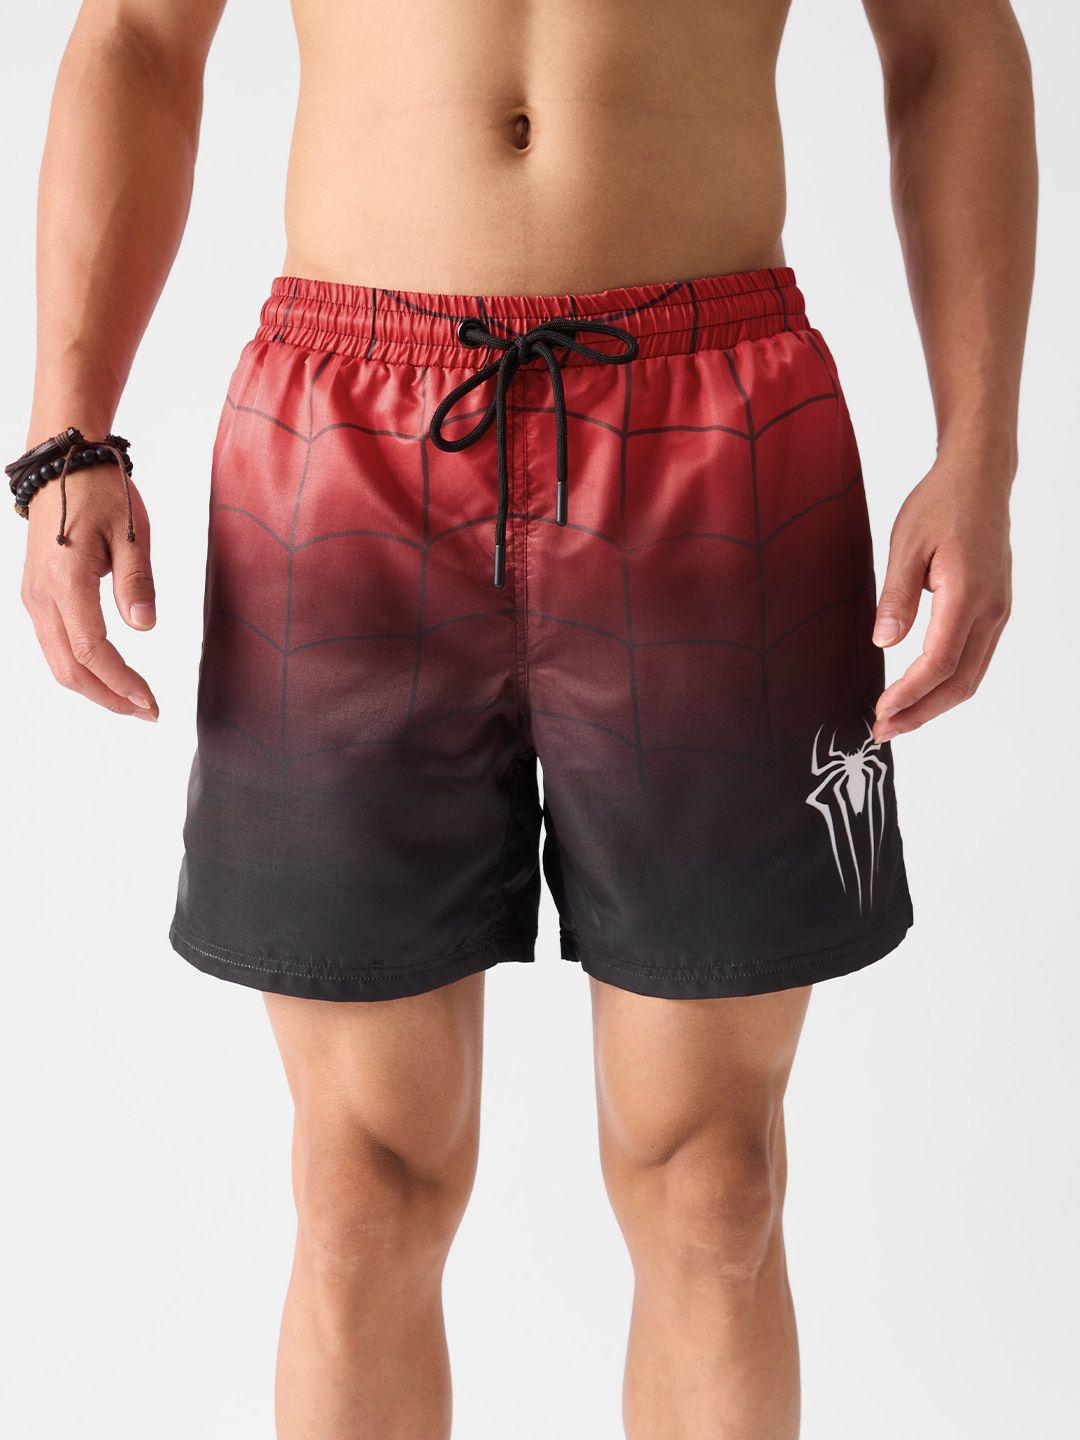 the-souled-store-men-red-mid-rise-spider-man-printed-sports-shorts